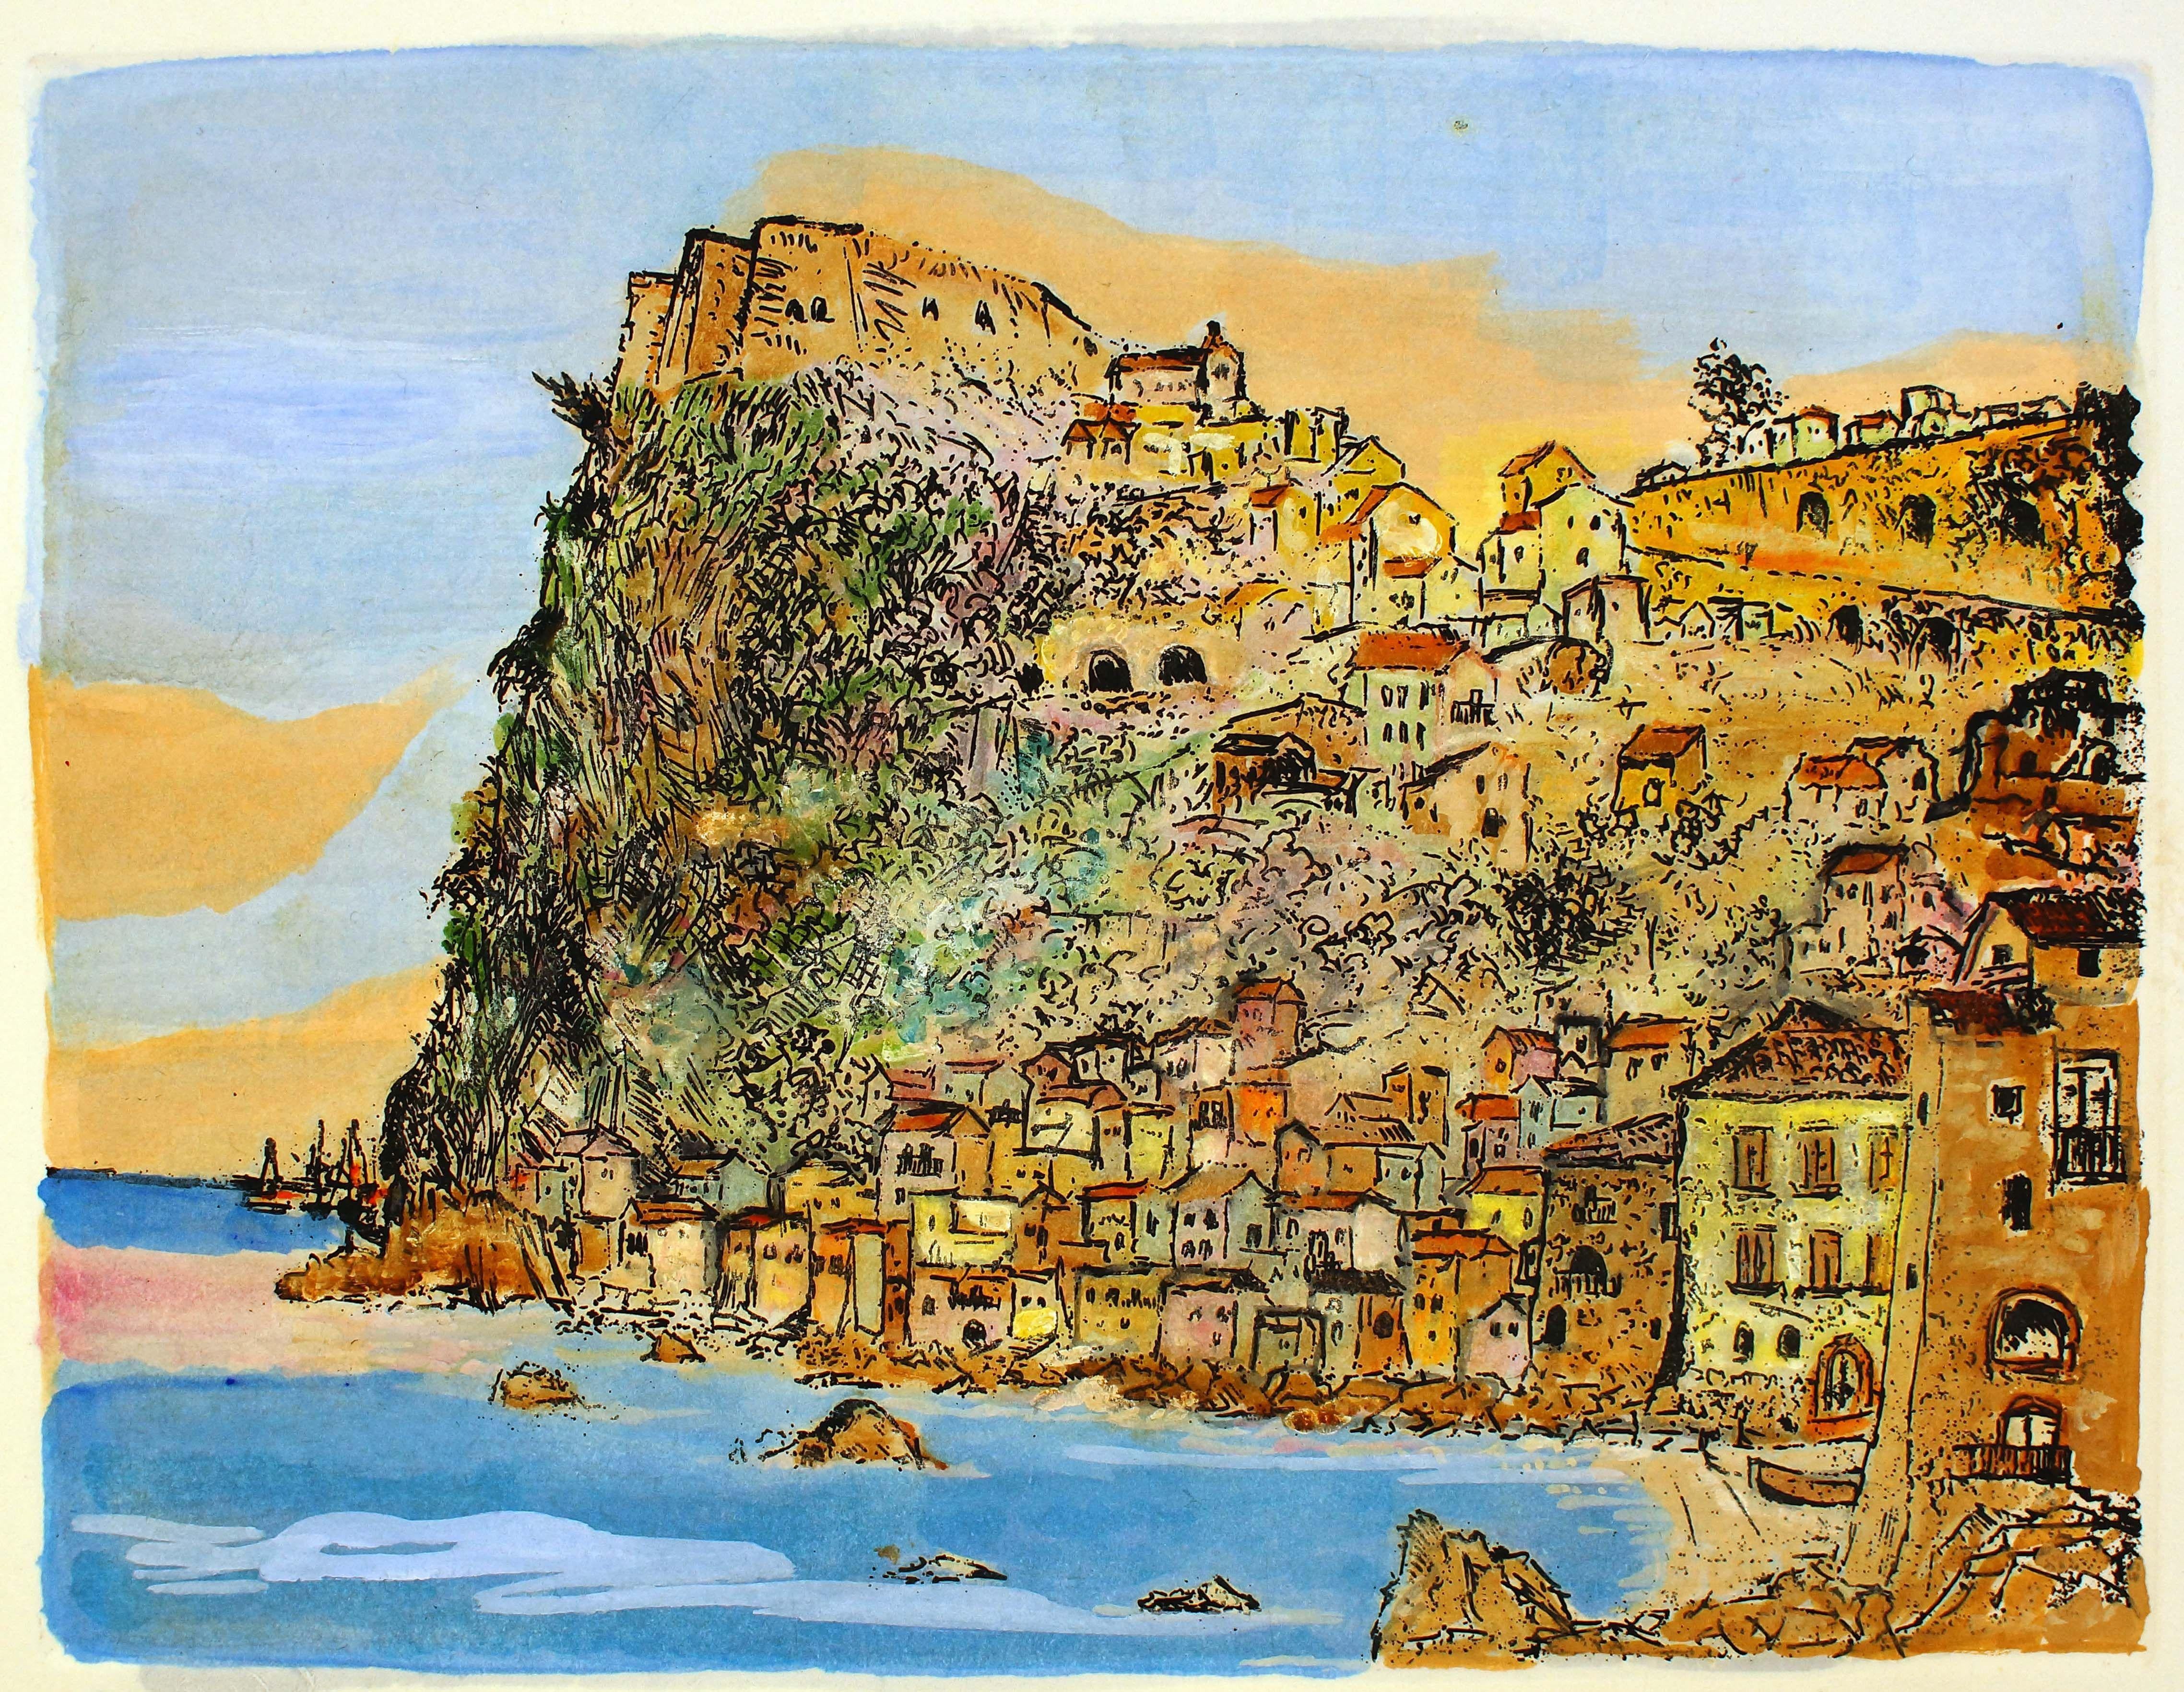 Scilla, Landscape - Country and Coast - Etching and Watercolor by G. Omiccioli